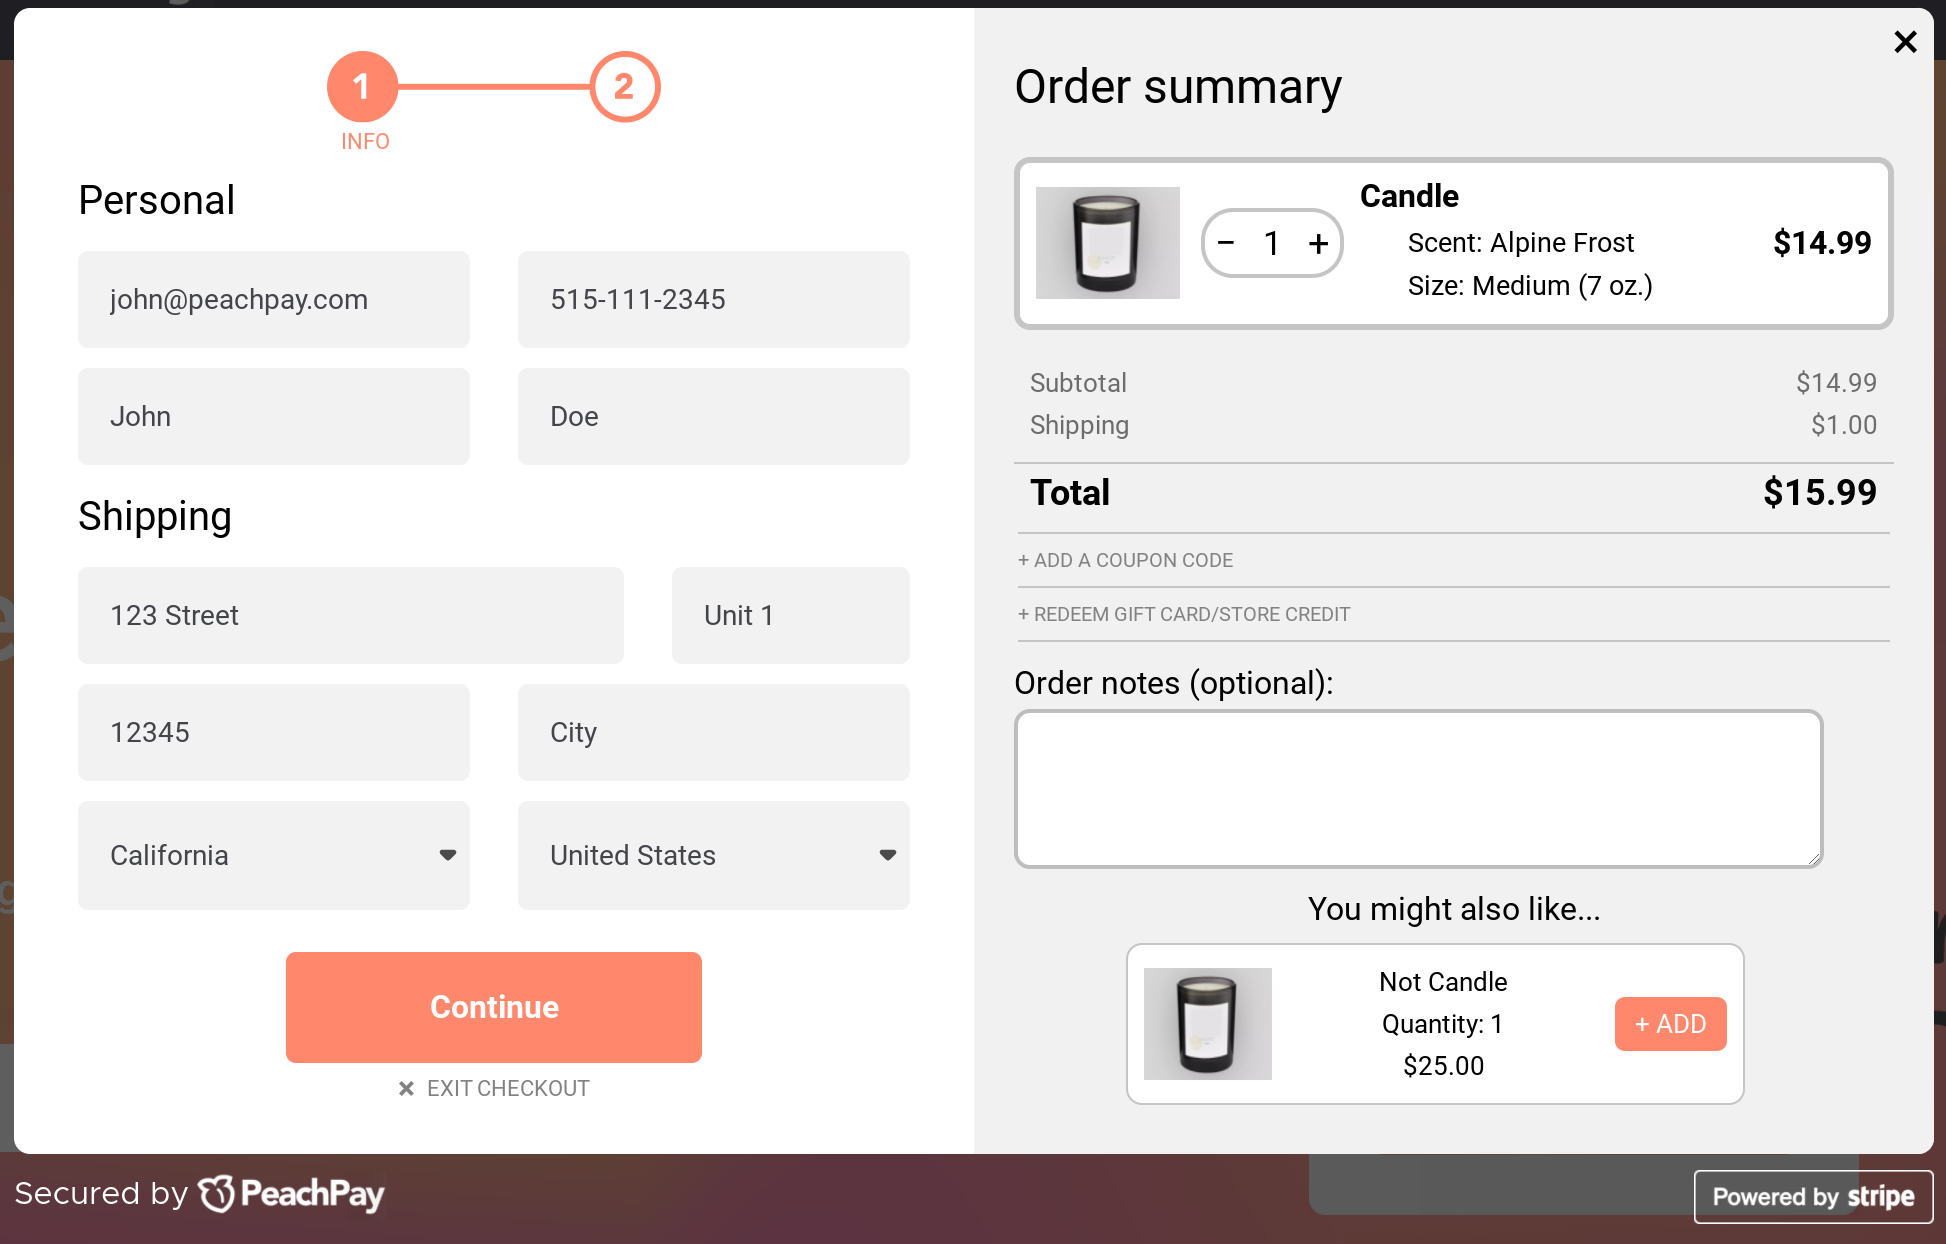 Recommending products during WooCommerce checkout with PeachPay